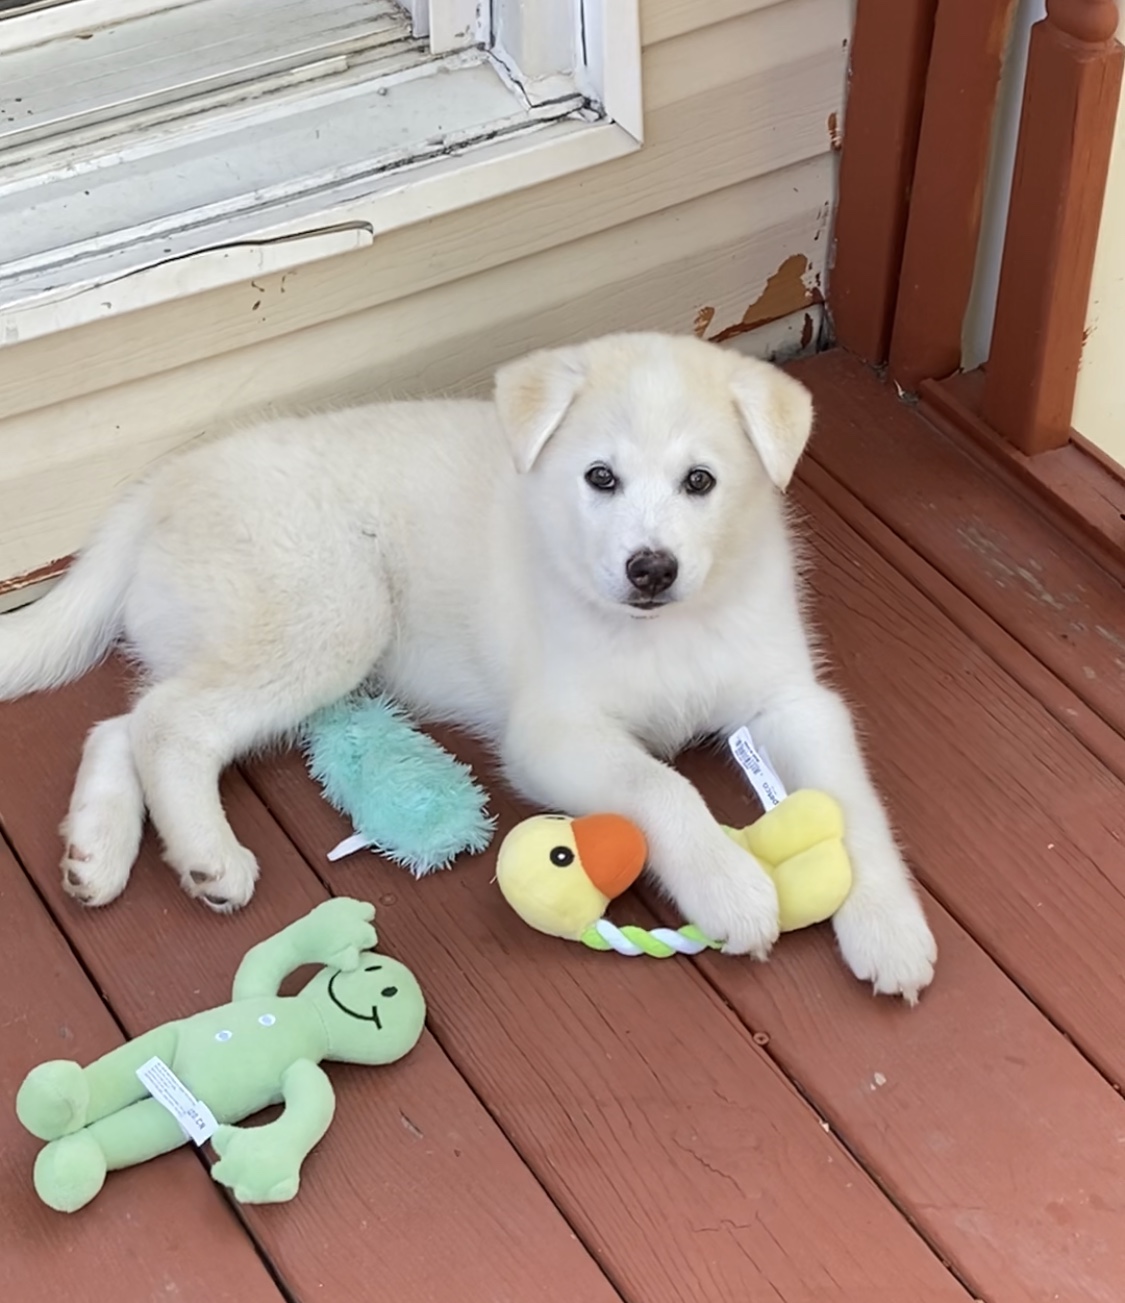 10 Week Male Husky Mixed Breed Puppy For Sale in Queens NY